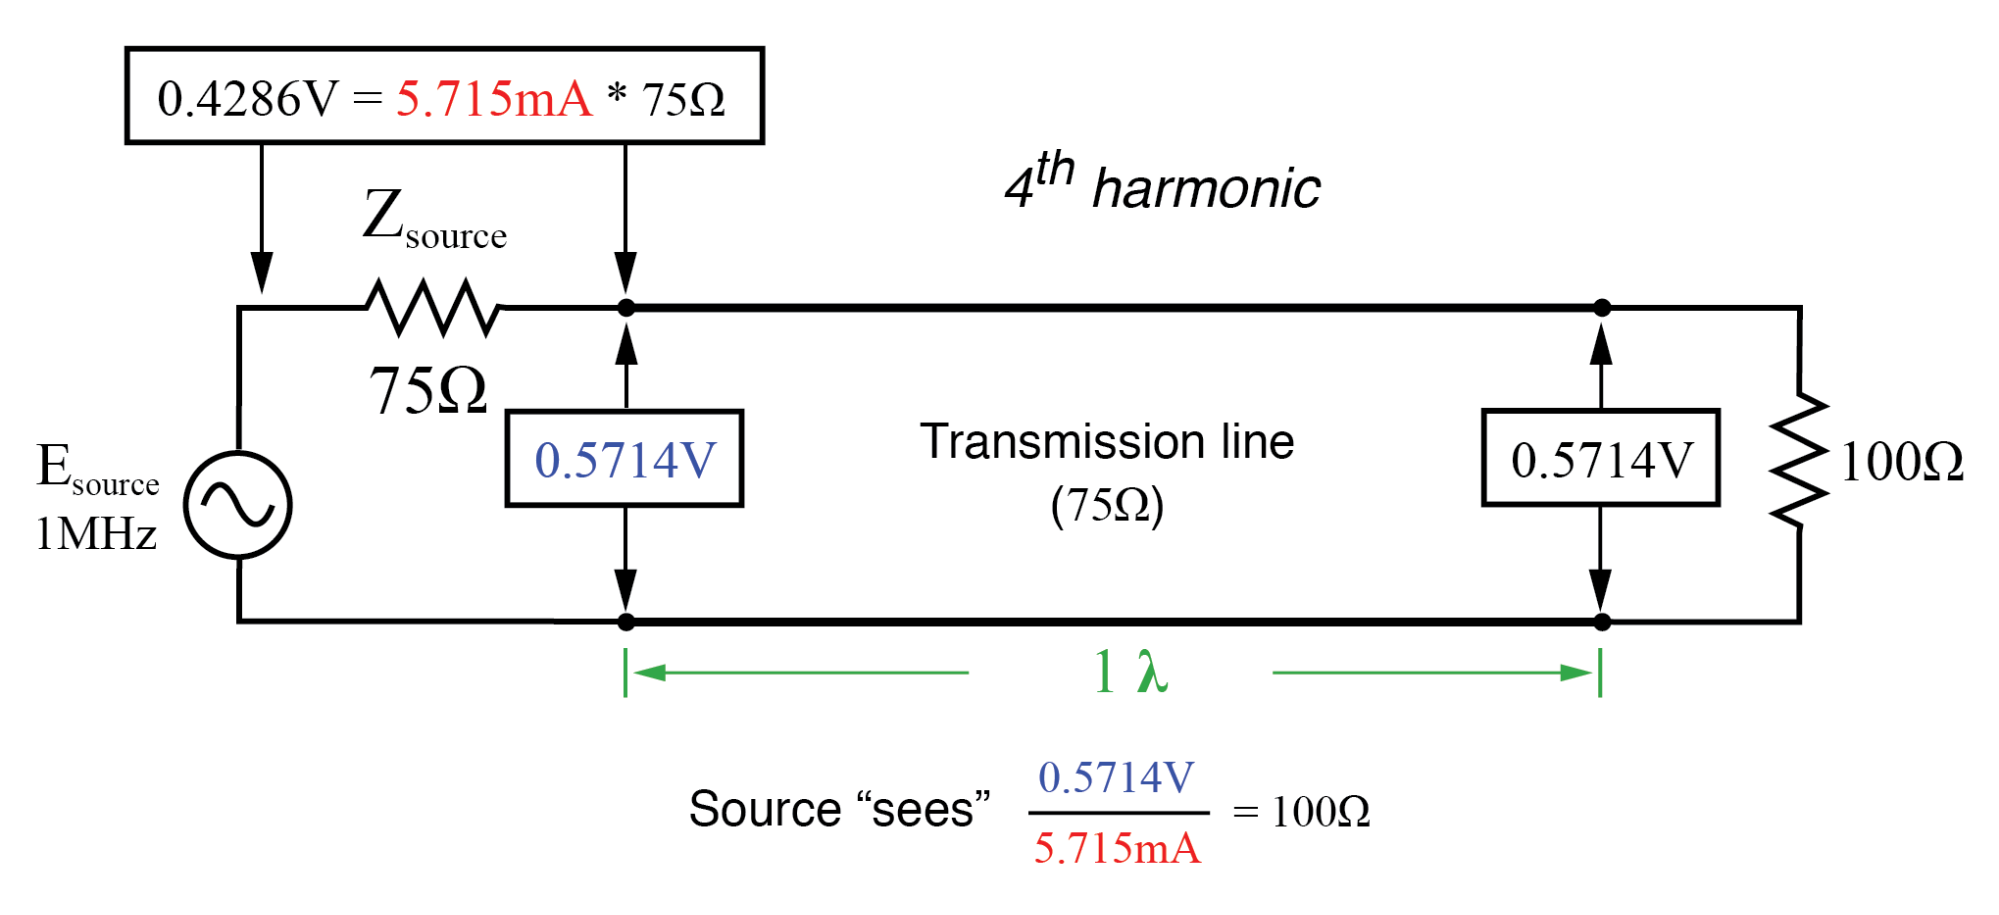 Source sees 100 Ω reflected from 100 Ω load at end of full-wavelength line (same as half-wavelength).